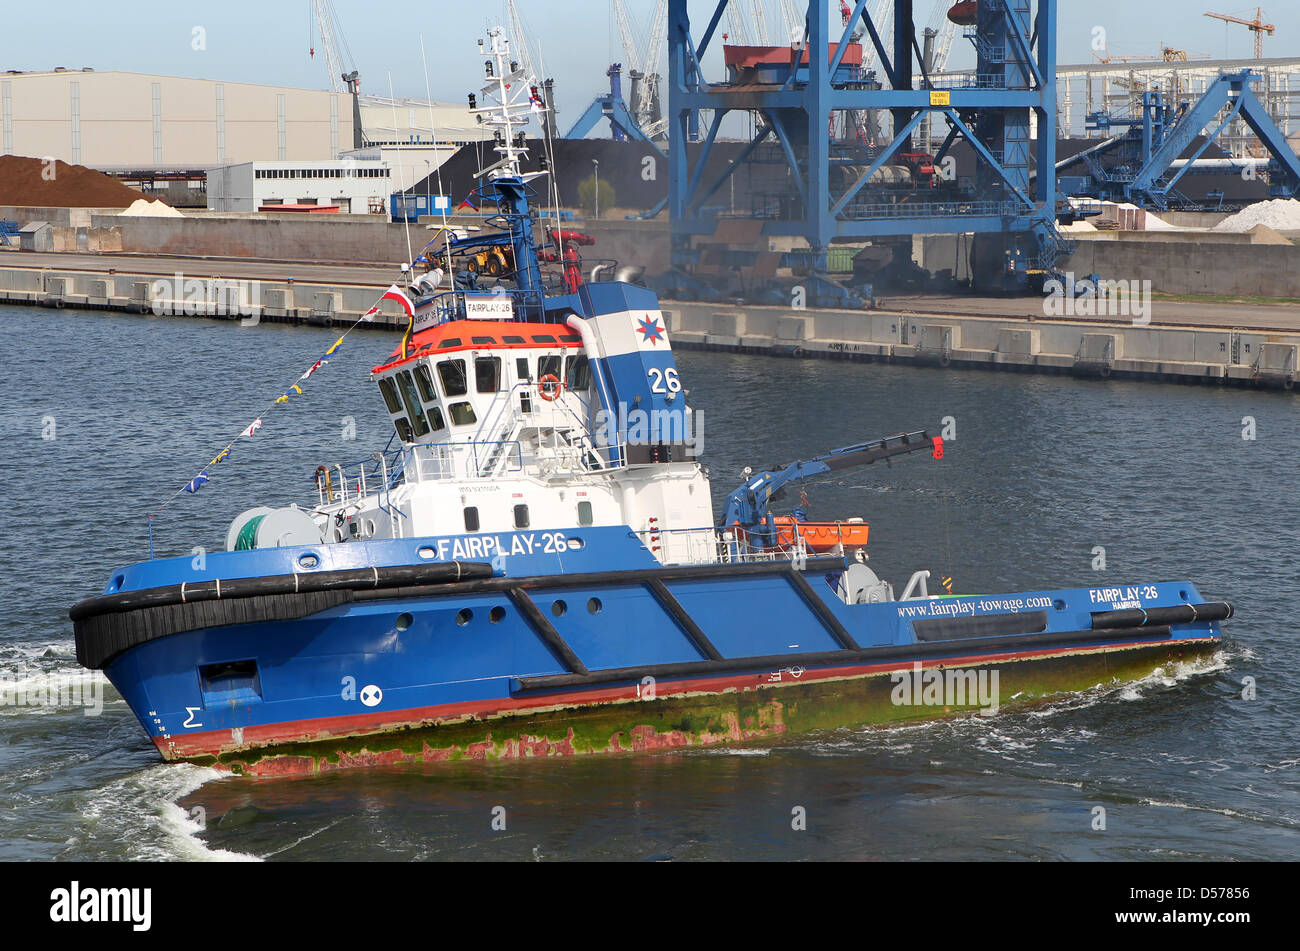 Emergency tug boat ''Fairplay 26'' shows its abilities during the ...